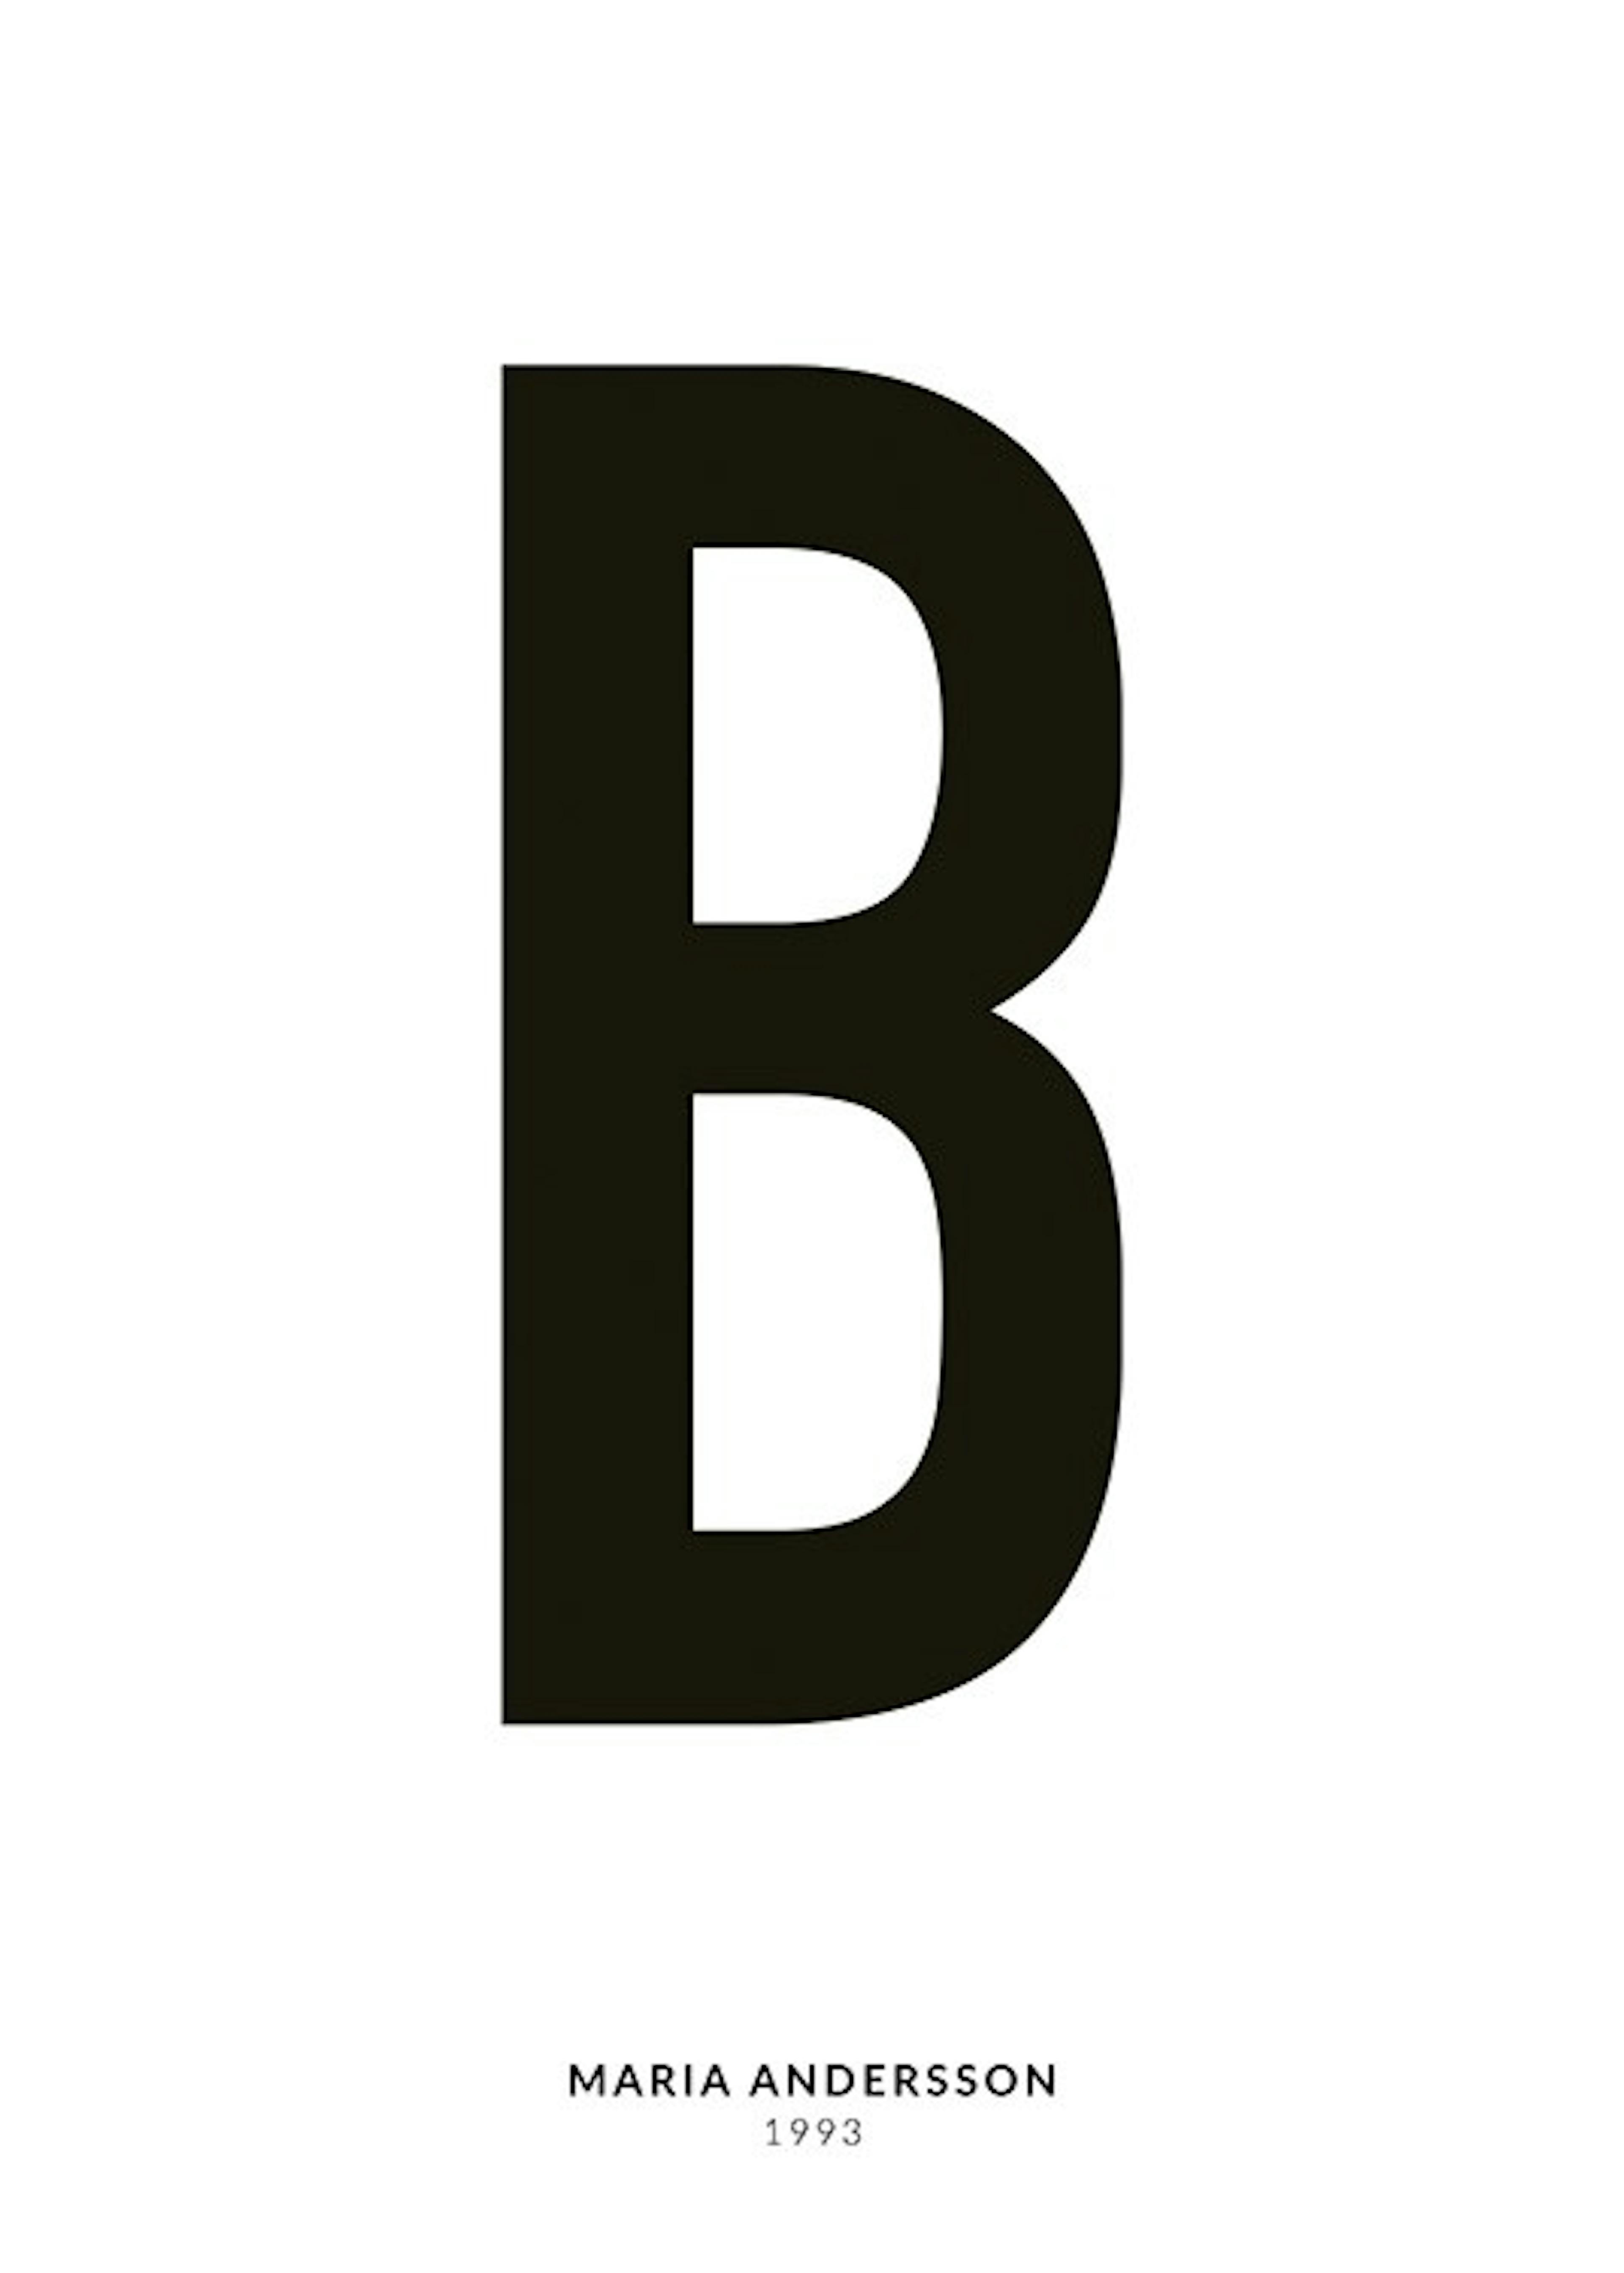 My Letter B Personal 0